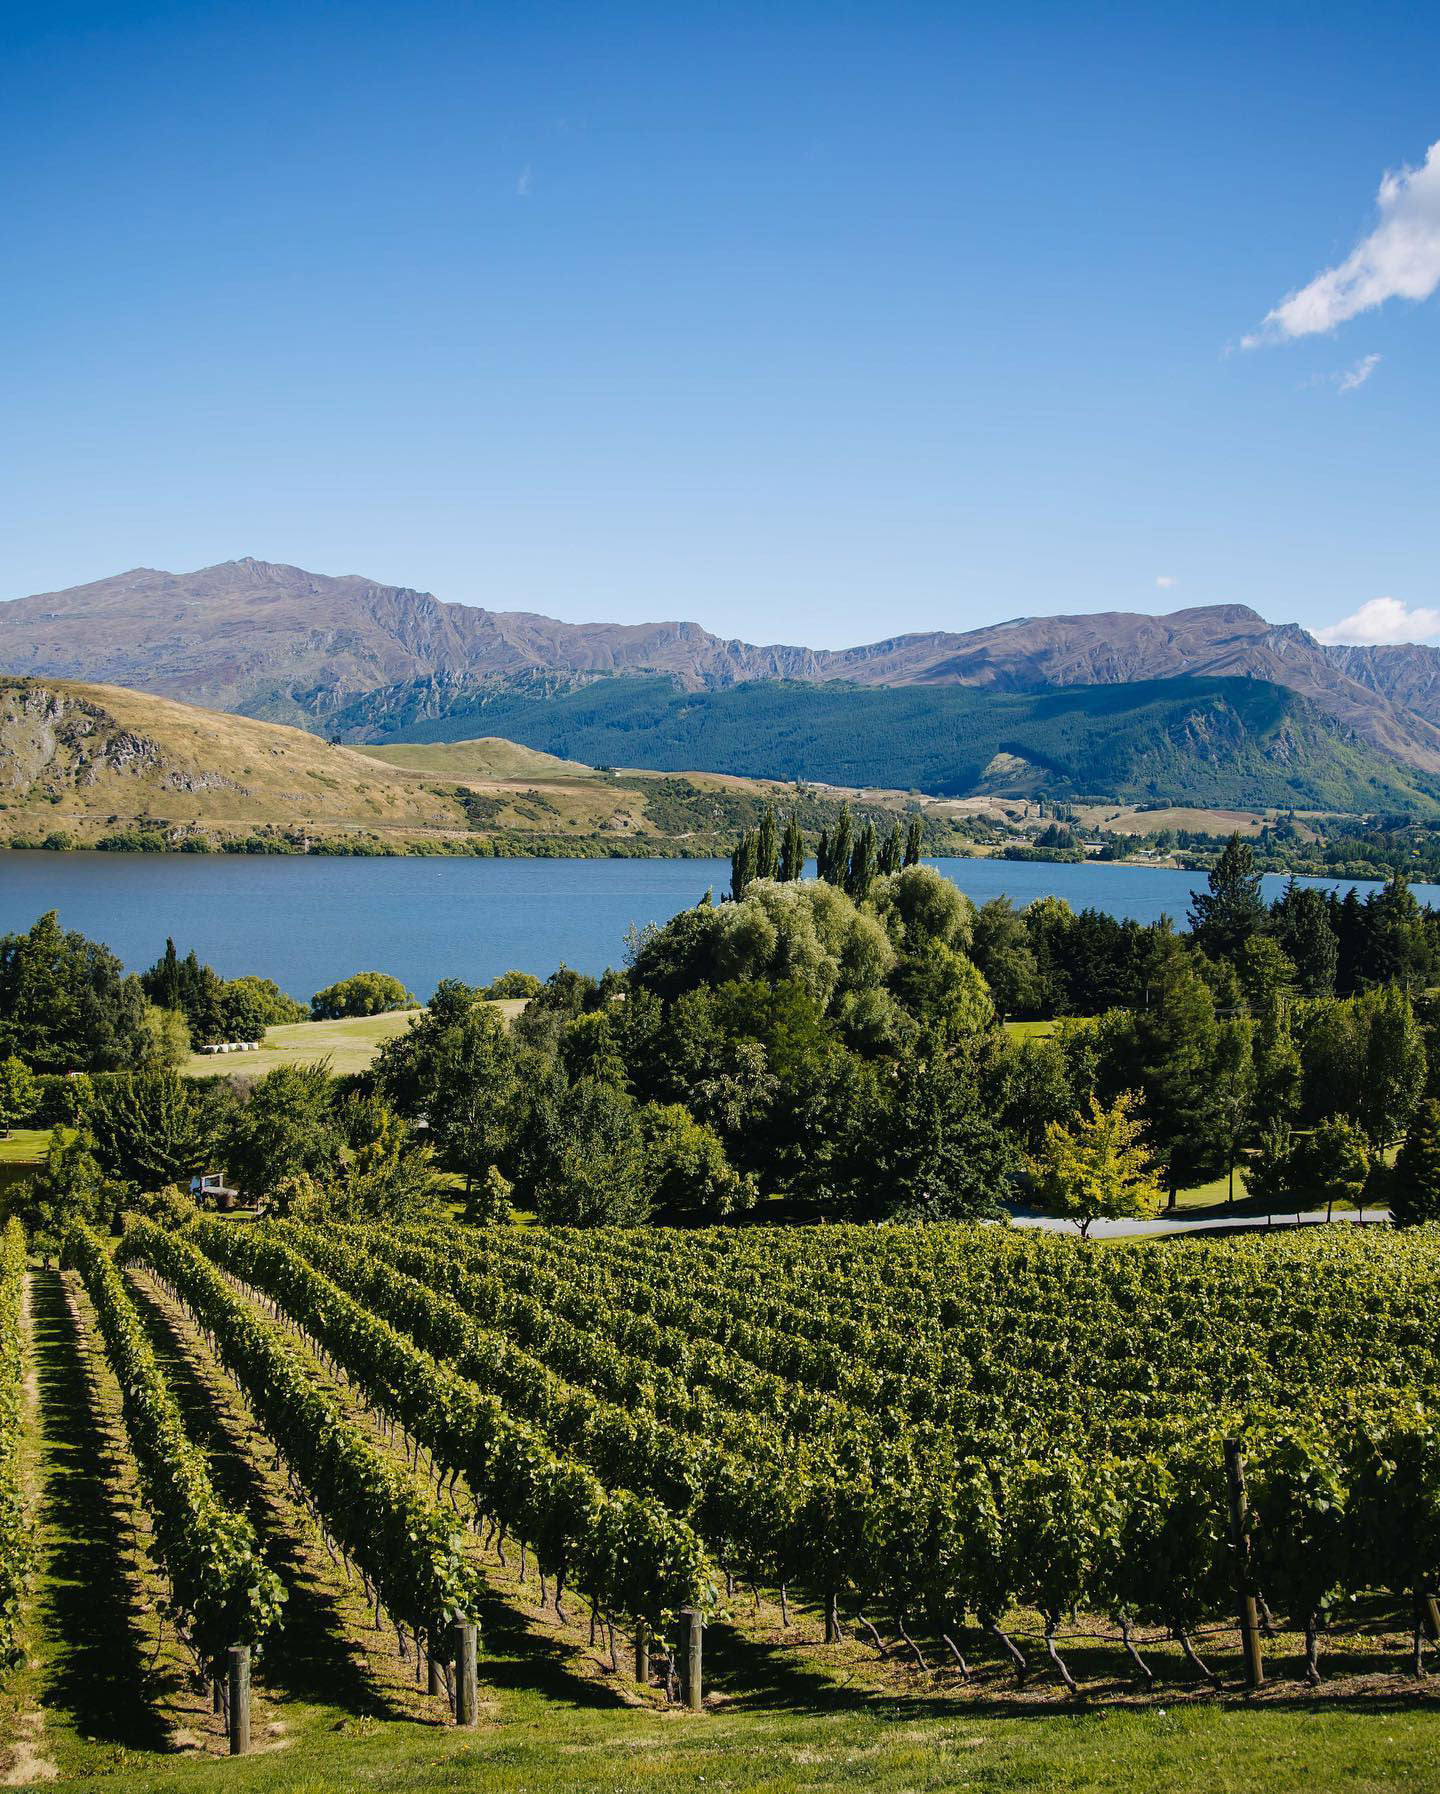 The Gibbston Wine Tasting Tour is a journey through the heart of Central Otago's wine paradise, where you'll sample handcrafted wines, meet passionate winemakers, and learn about the art of winemaking